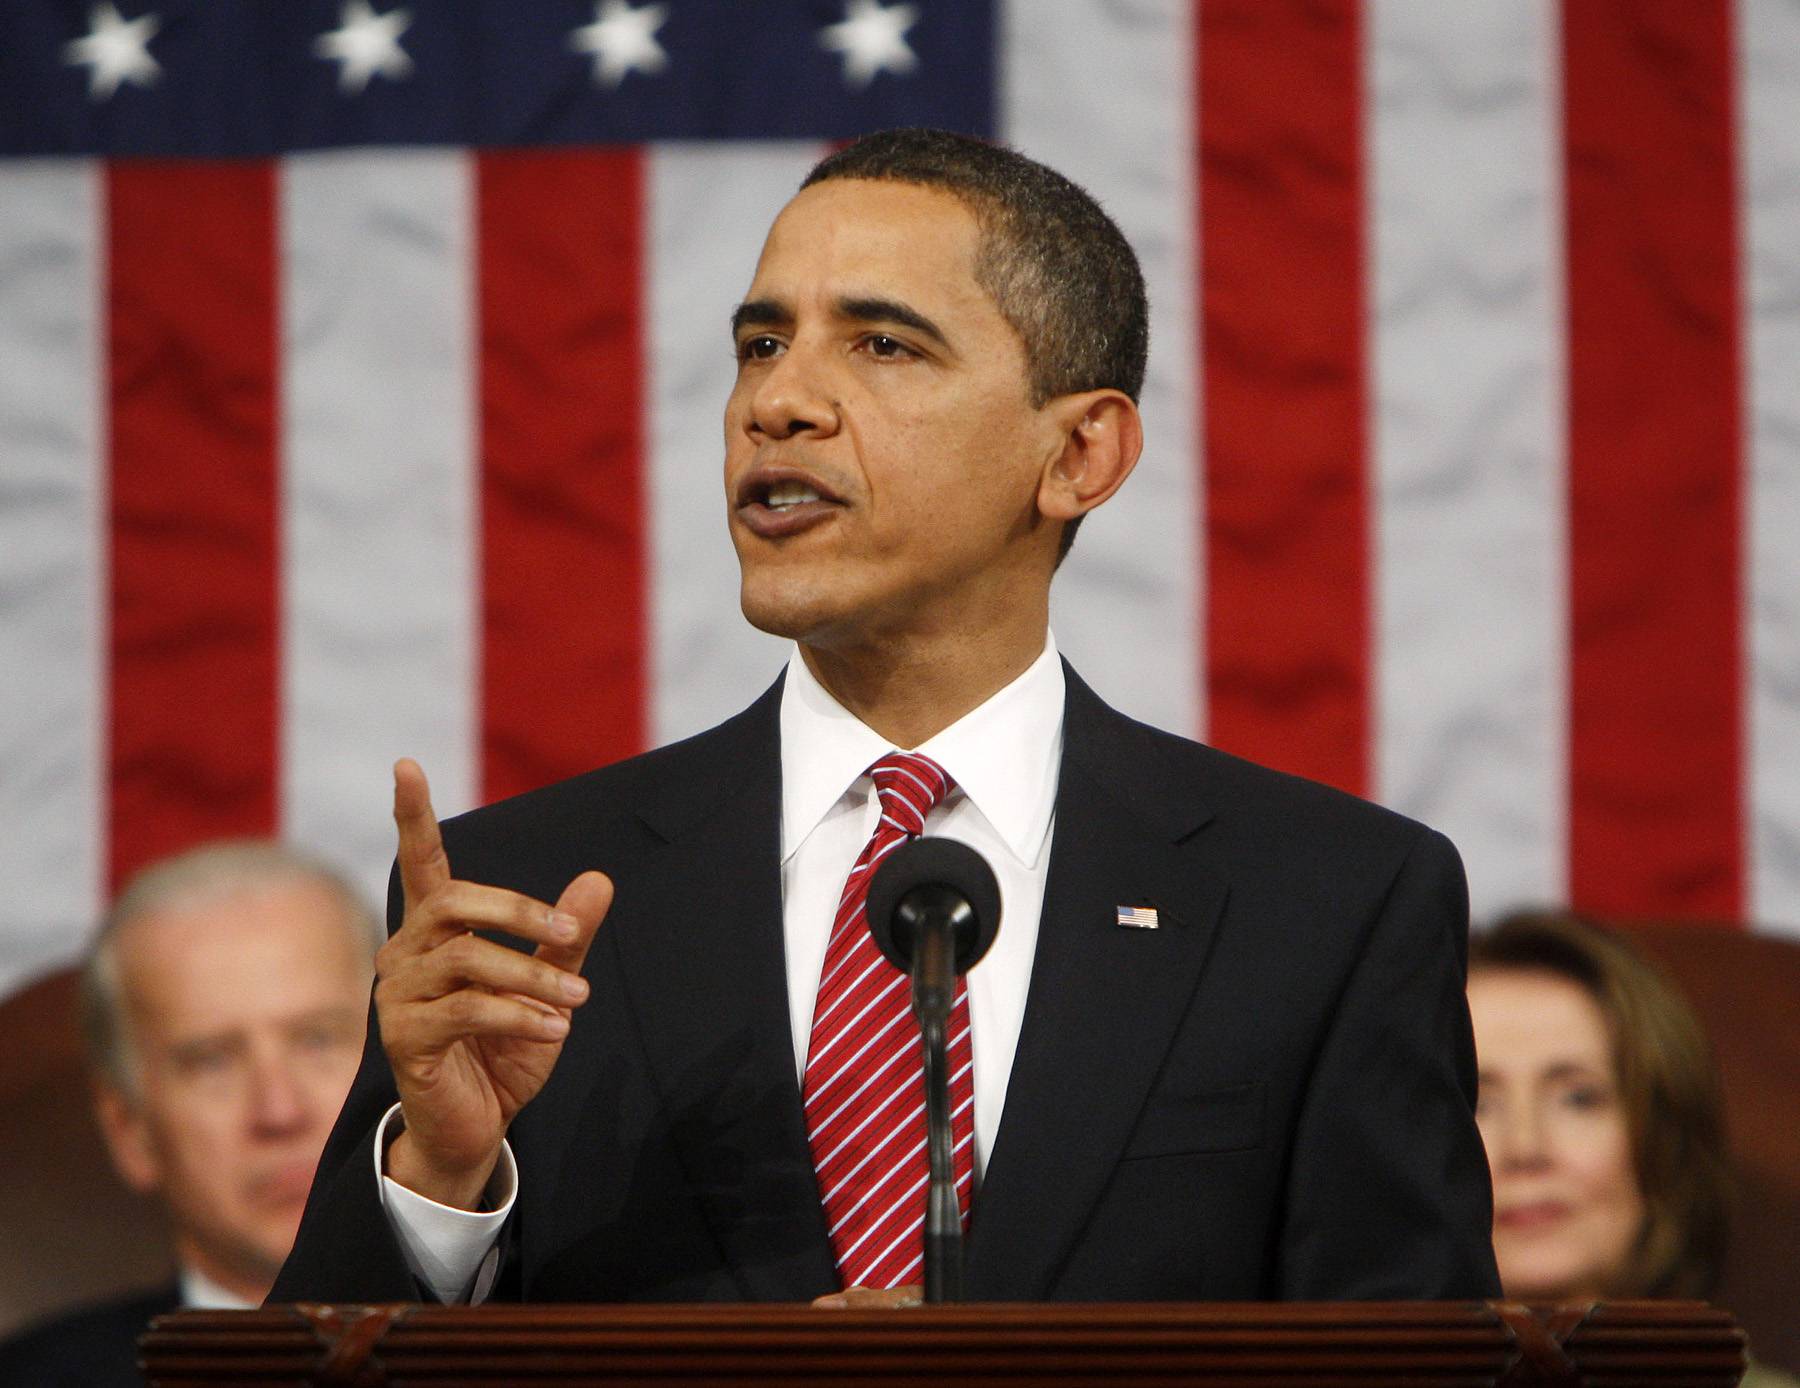 In his first speech before a joint session of Congress, on Feb. 24, 2009,&nbsp;President Obama outlined an agenda to revive the “massive debt” he’d inherited “to build a new foundation for lasting prosperity.” Technically, it wasn’t a State of the Union address because Obama’s presidency was only a month old. He announced a new lending fund to provide college, automobile and small-business loans and a housing plan to help struggling homeowners refinance their mortgages and said that Wall Street would be held accountable for its spending. He also began the push for his health care reform plan. The unemployment rate nationally was 8.1 percent, while the African-American jobless rate was 13.4 percent.&nbsp;(Photo: Pablo Martinez Monsivais-Pool/Getty Images)